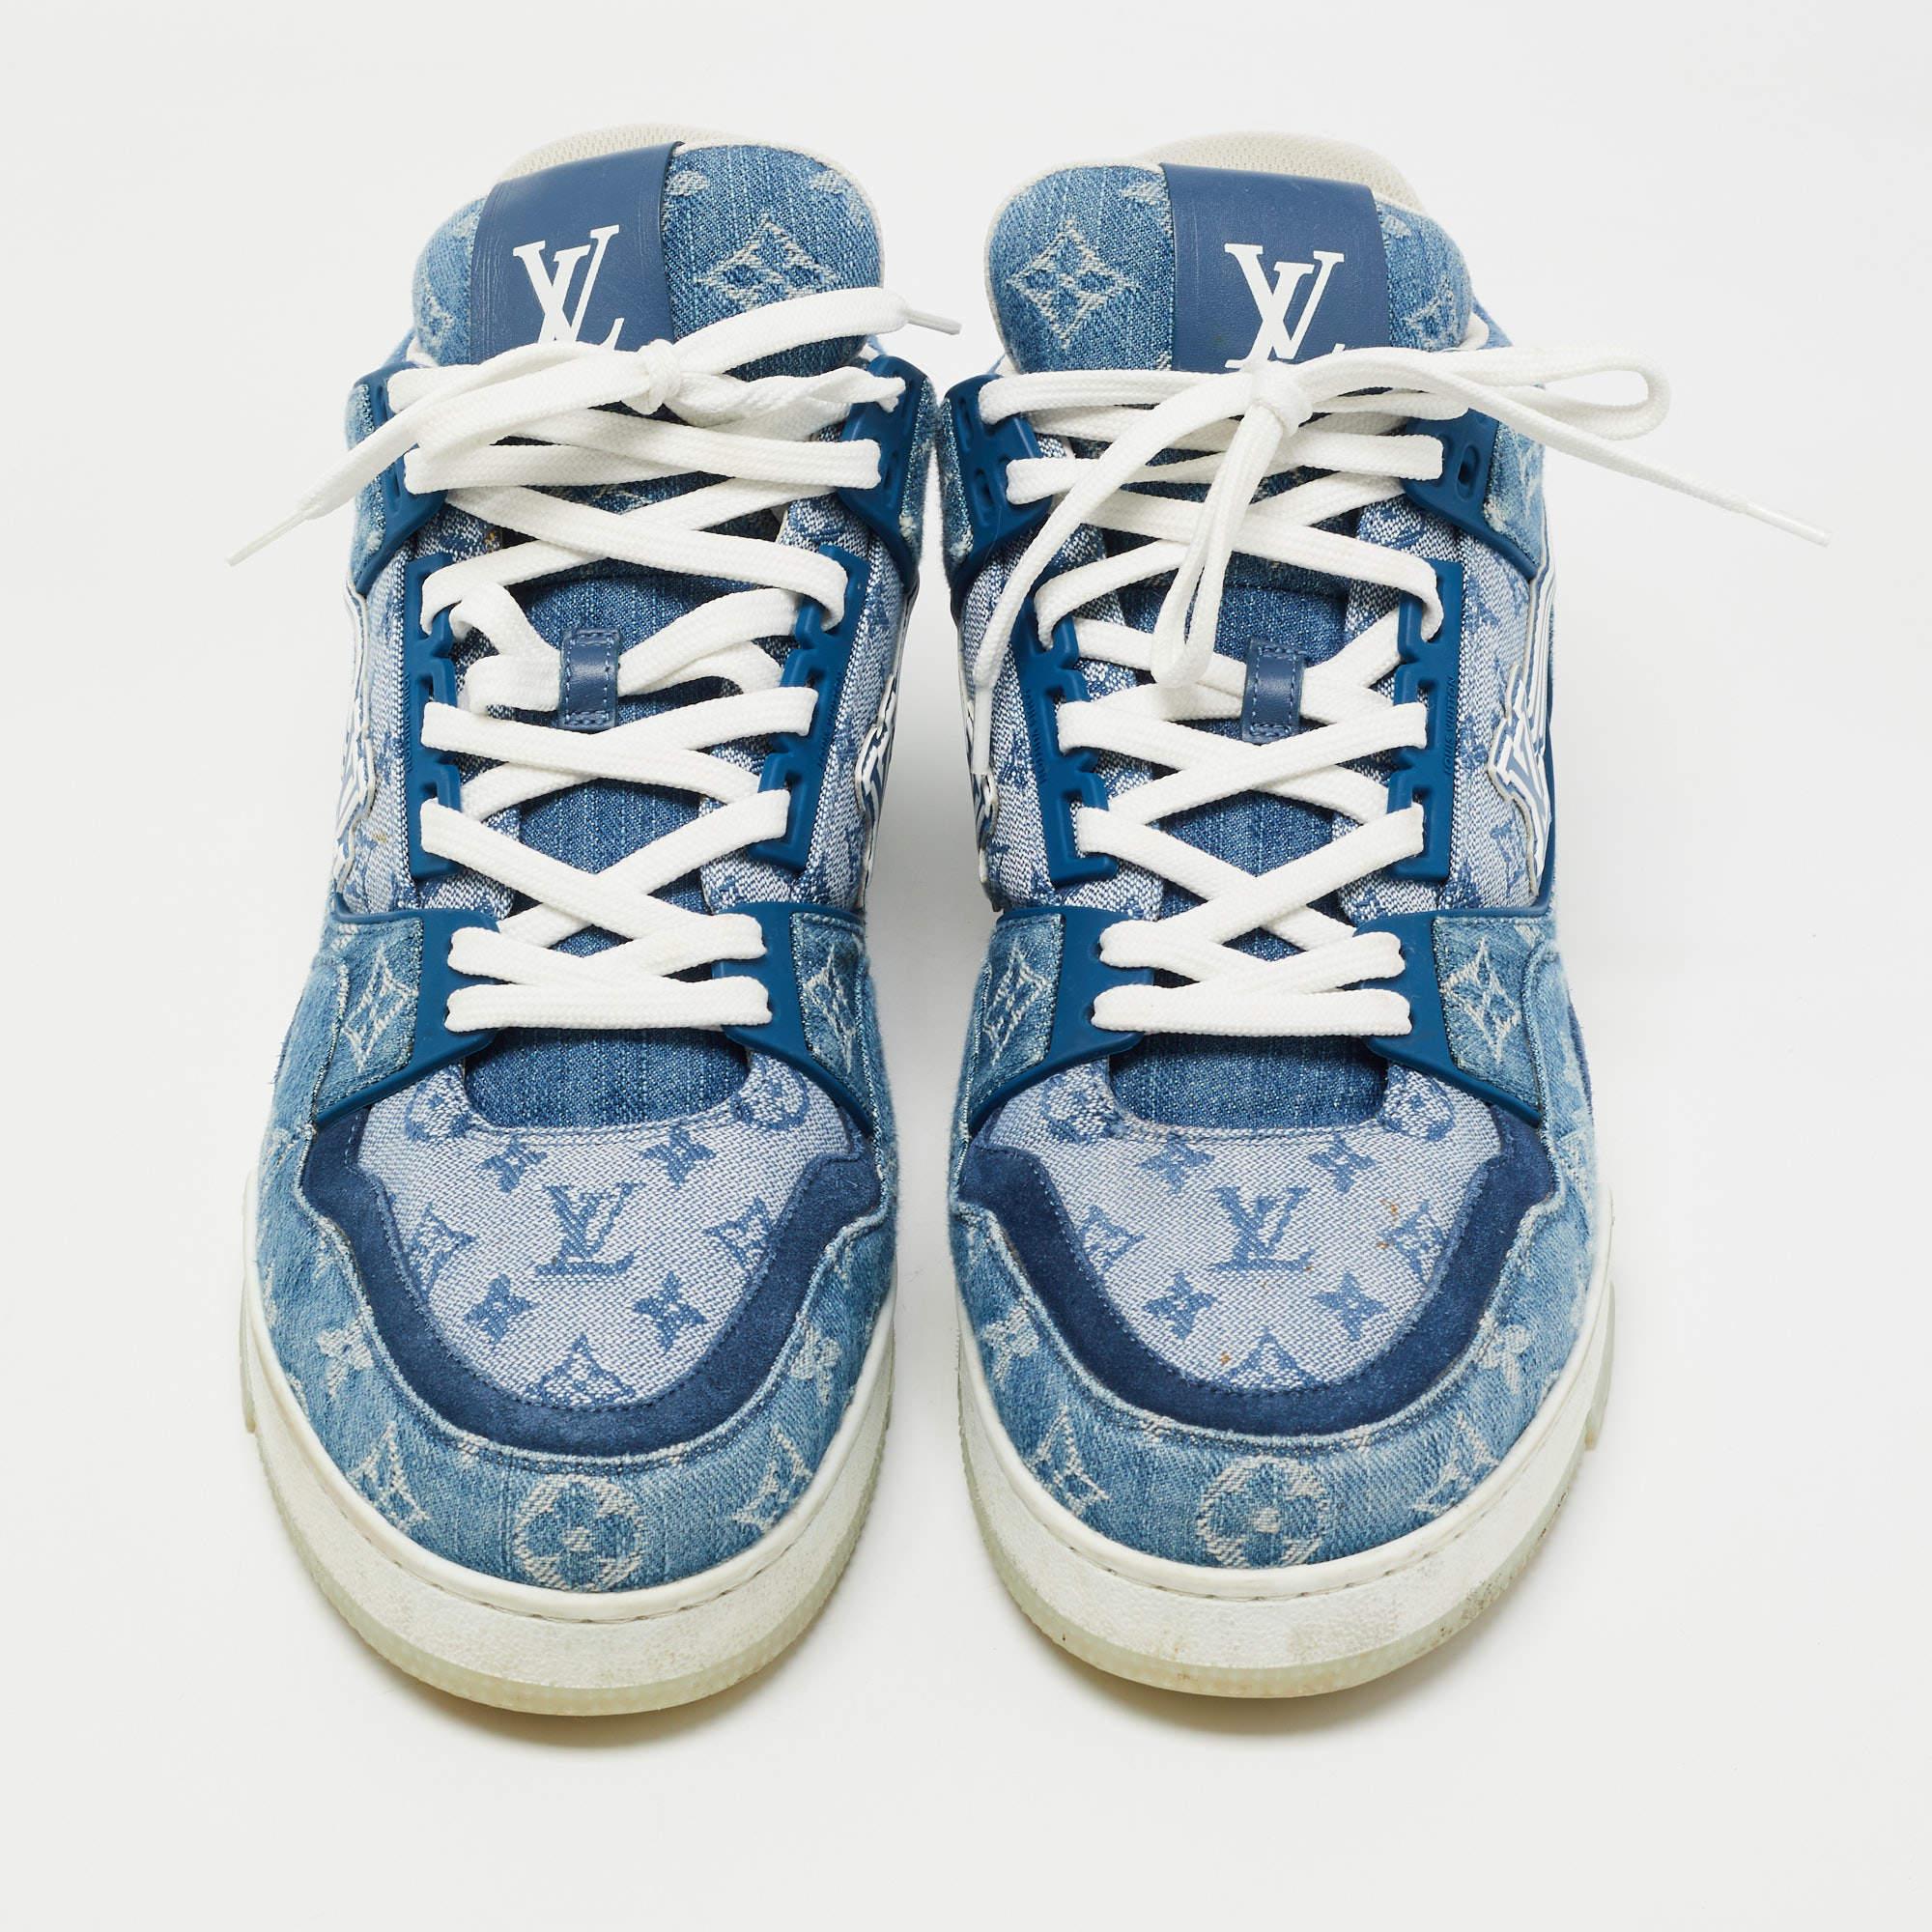 Louis Vuitton Lv Trainer Blue - For Sale on 1stDibs  lv trainer baby blue, lv  trainers baby blue, baby blue lv trainers